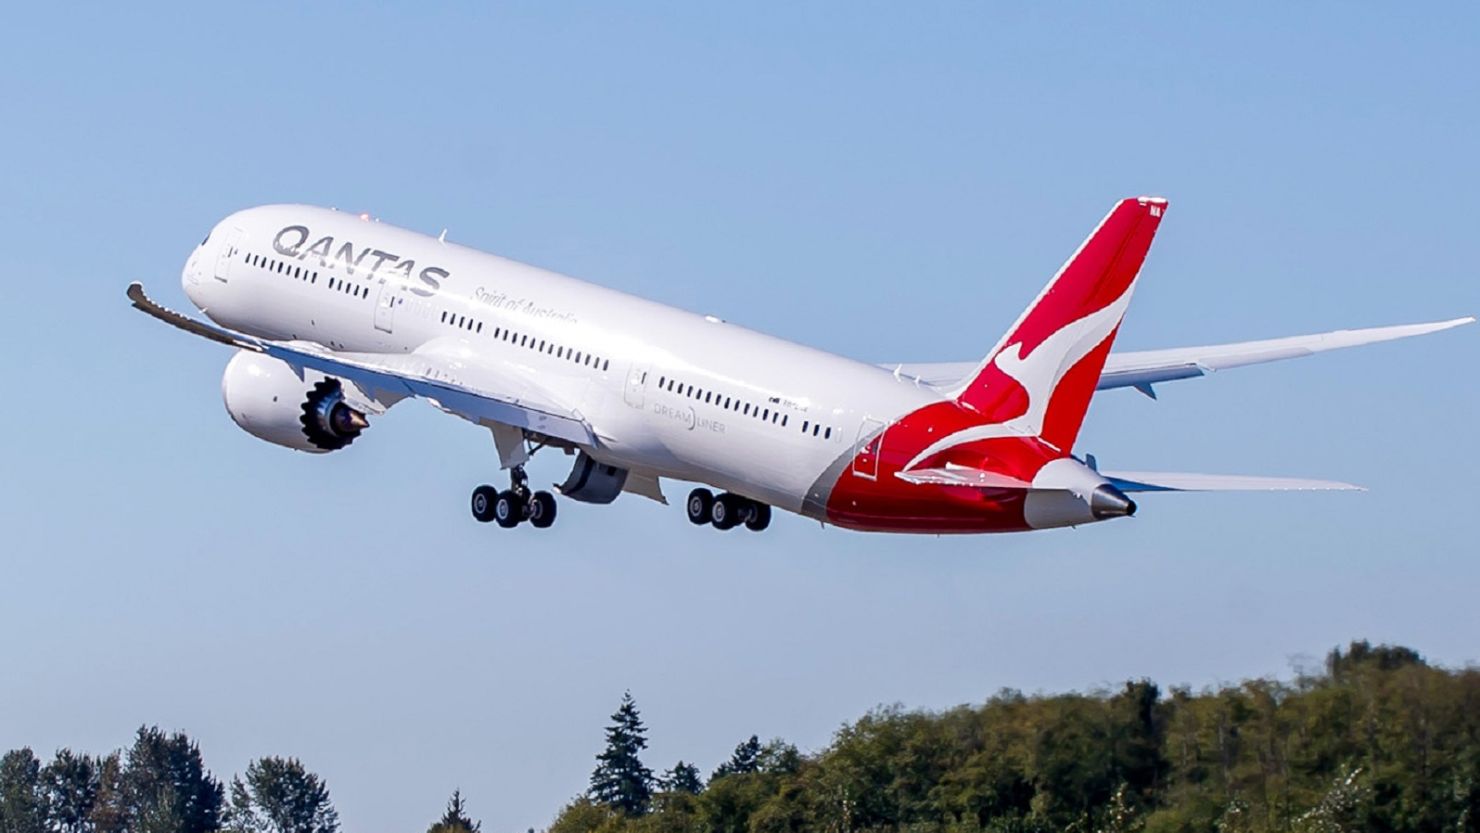 Qantas's first Boeing 787 launched non-stop flights between the UK and Australia in March, 2018.